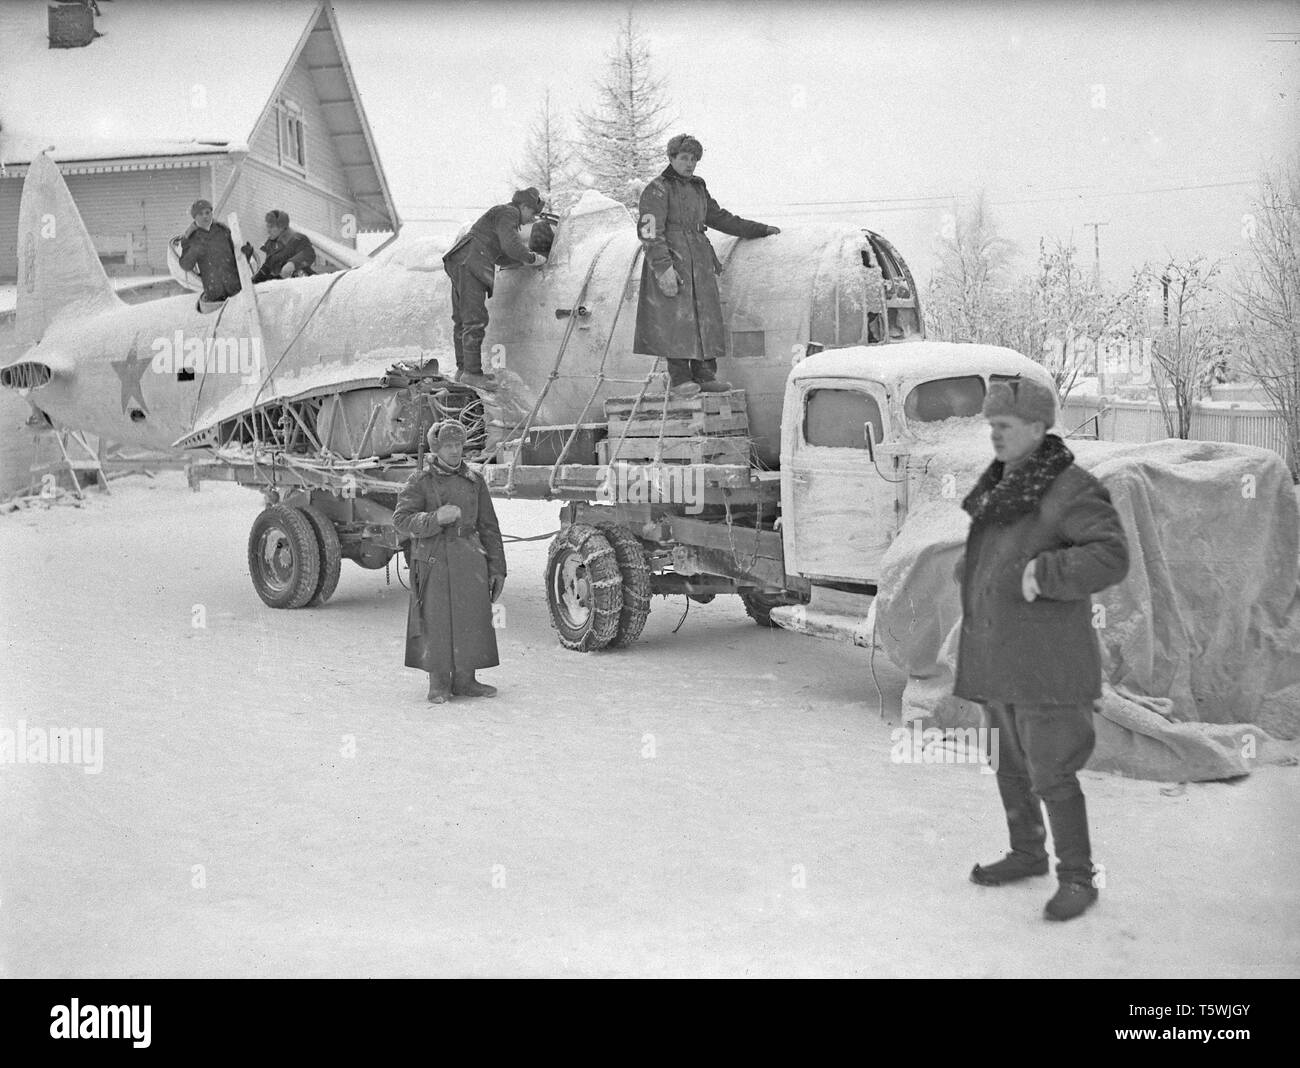 The Winter War. A military conflict between the Soviet union and Finland. It began with a Soviet invasion on november 1939 when Soviet infantery crossed the border on the Karelian Isthmus. About 9500 Swedish volunteer soldiers participated in the war. Here at Rovaniemi, North Finland. The unit called Lapland Group successfully stopped the Soviet troups,  though outnumbered, at Salla and Petsamo. Picture shows Finnish soldiers loading part of a Soviet aircraft that was shot down. January 1940. Photo Kristoffersson ref 99-3 Stock Photo